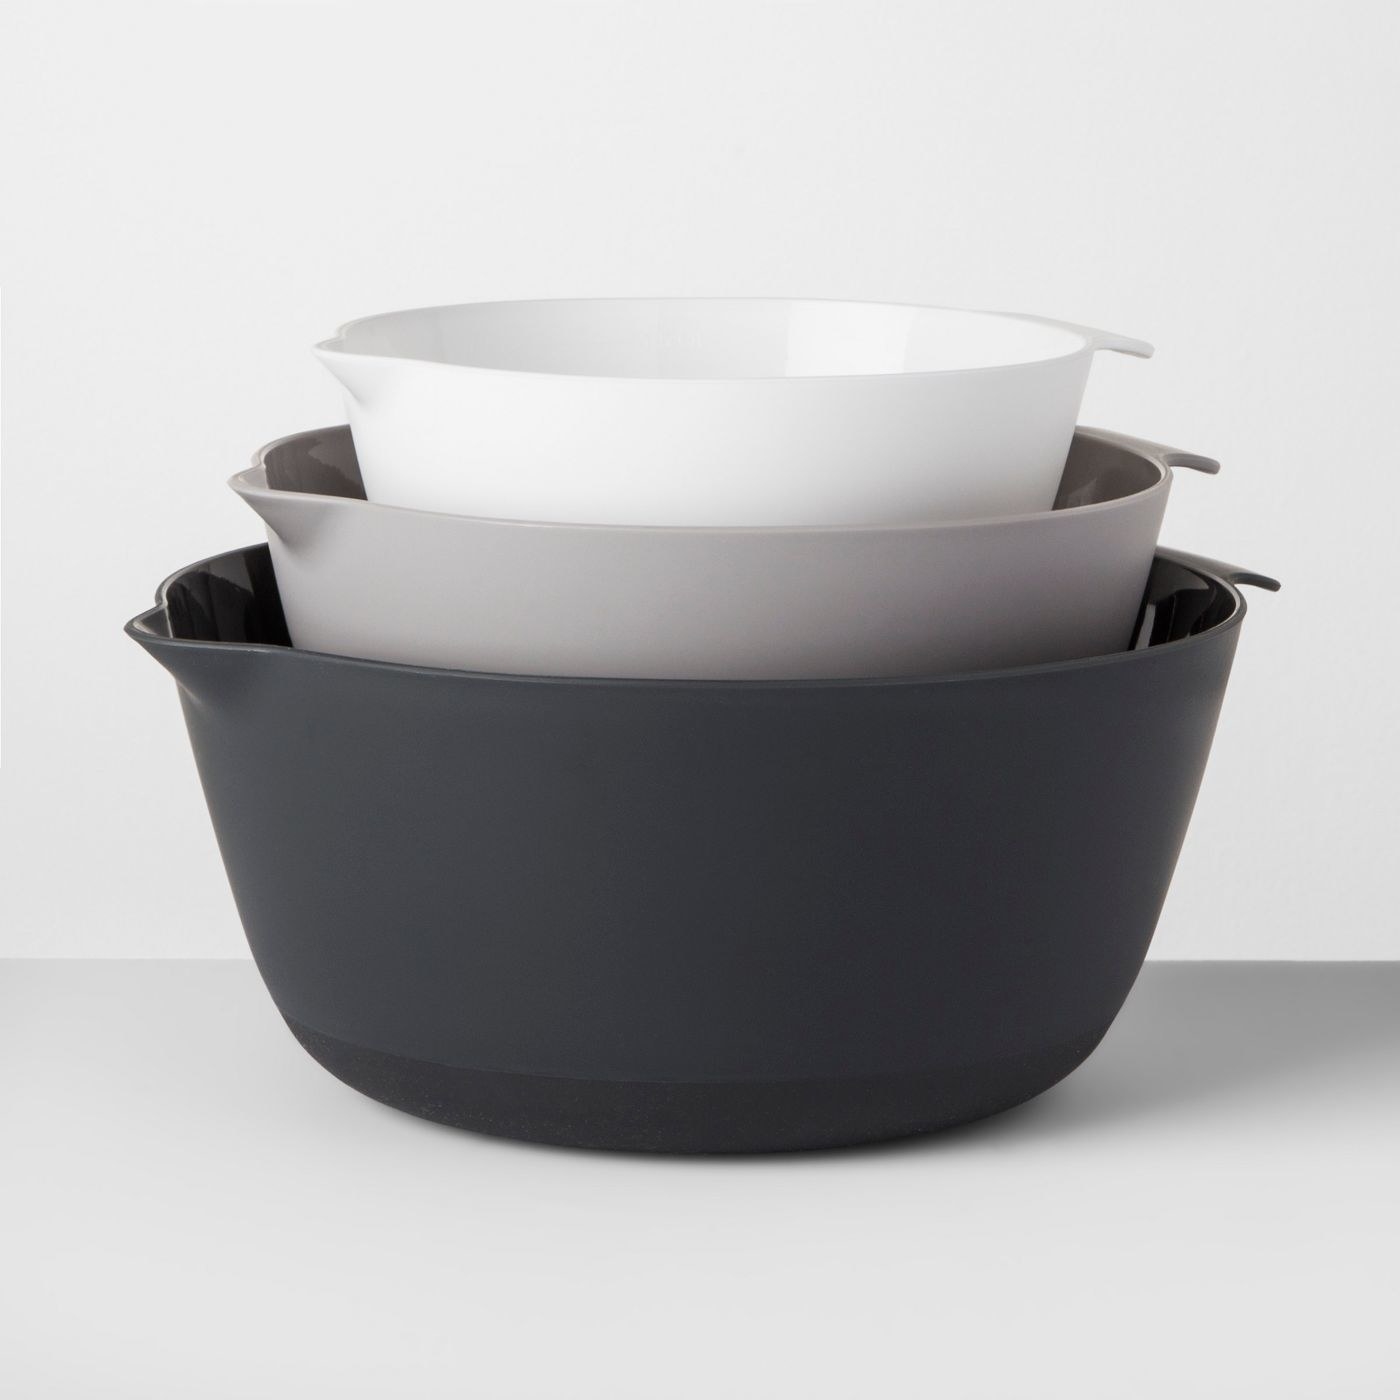 The set of mixing bowls